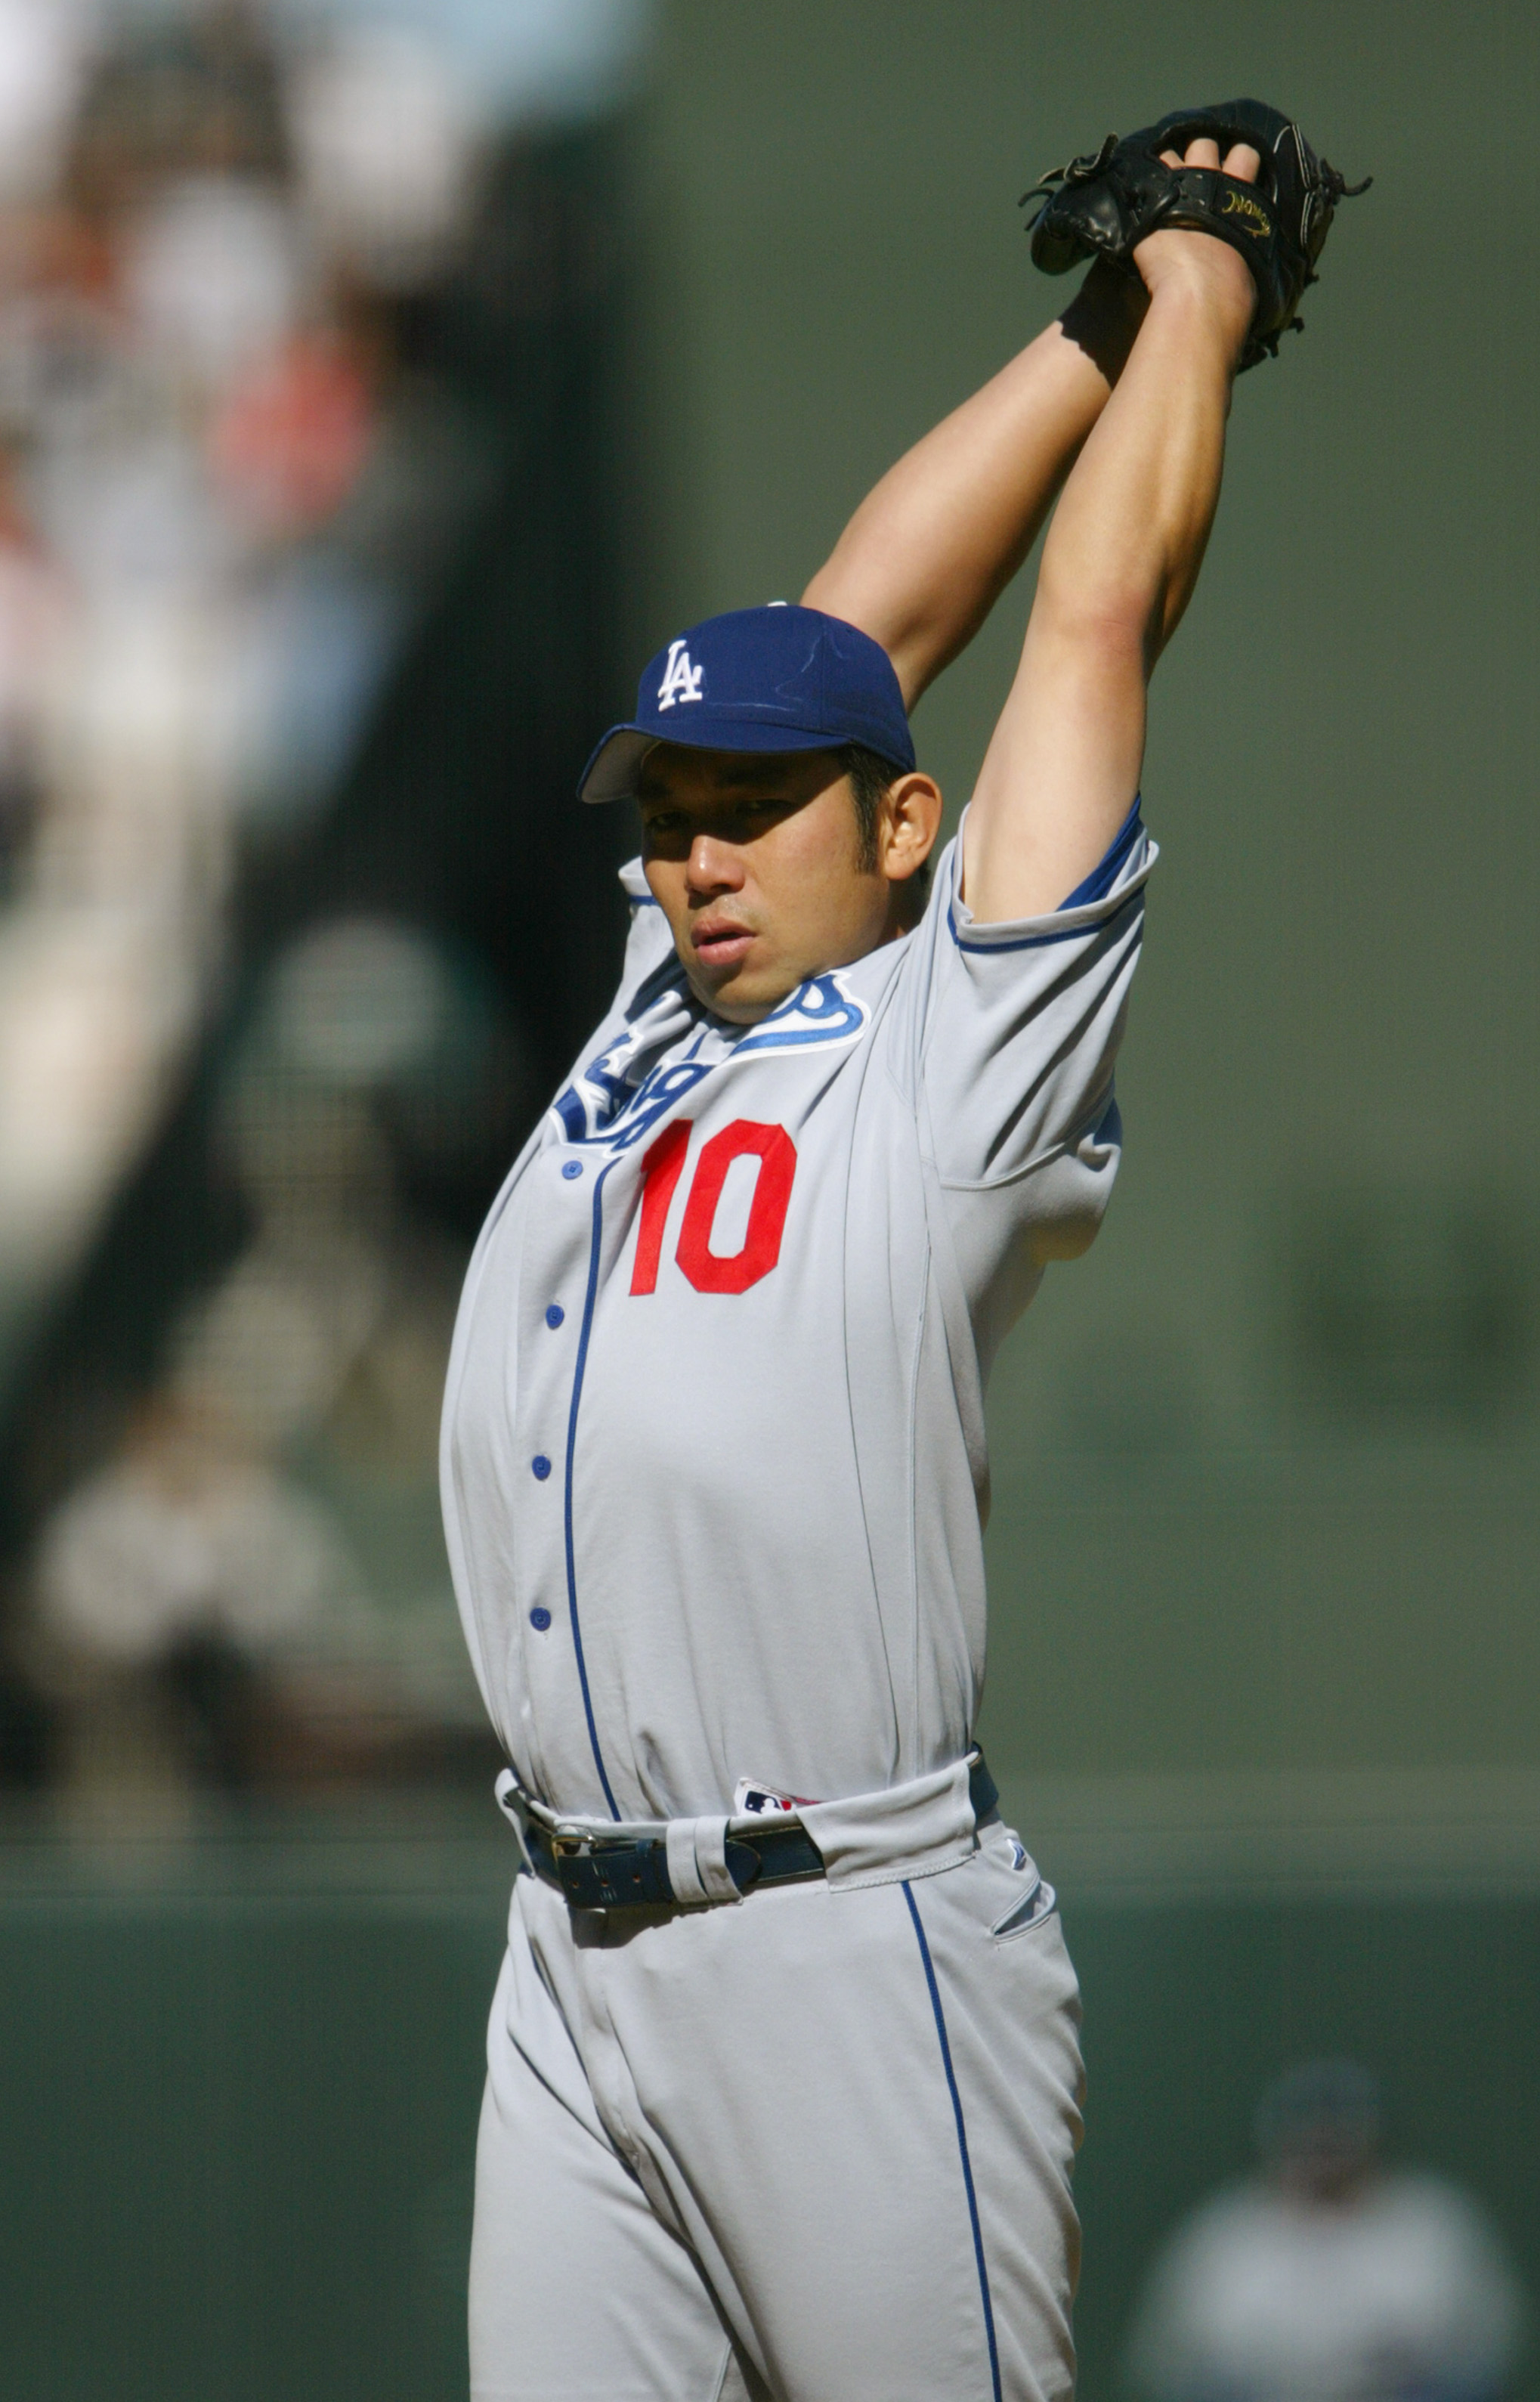 SAN FRANCISCO - JUNE 24:  Hideo Nomo #10 of the Los Angeles Dodgers pitches during the game against the San Francisco Giants on June 24, 2004 at SBC Park in San Francisco, California. The Giants defeated the Dodgers 9-3.  (Photo by Justin Sullivan/Getty I